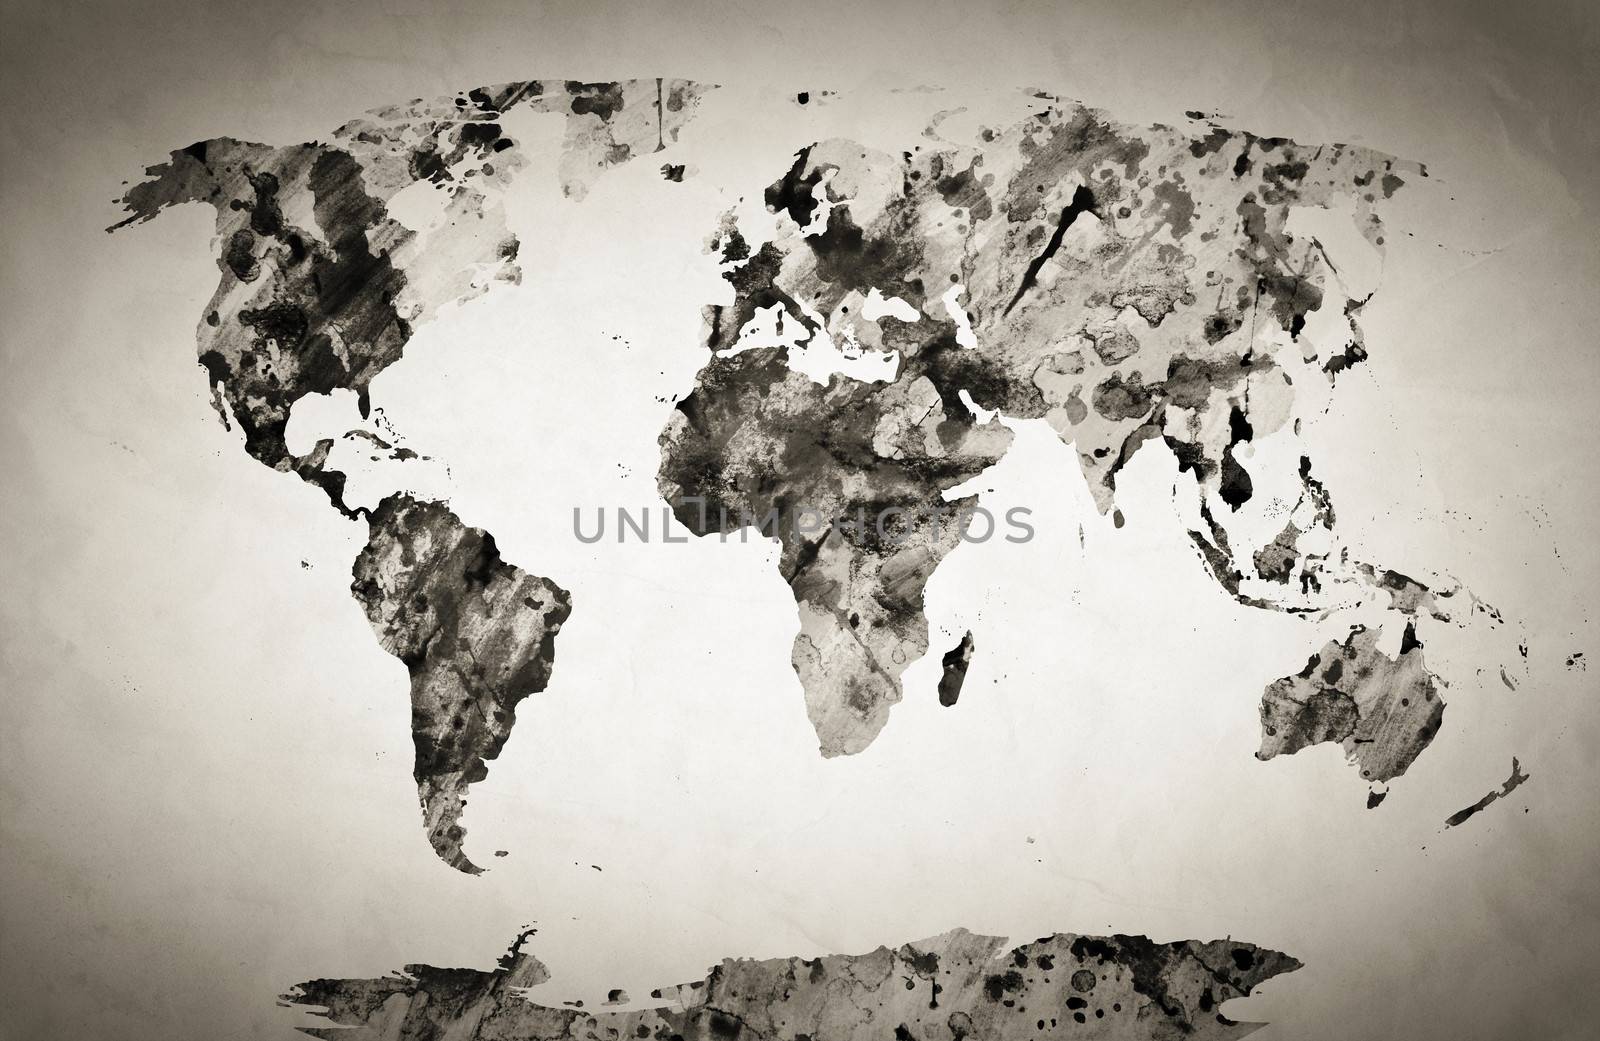 Watercolor world map. Black and white paint on paper, retro style. HD quality